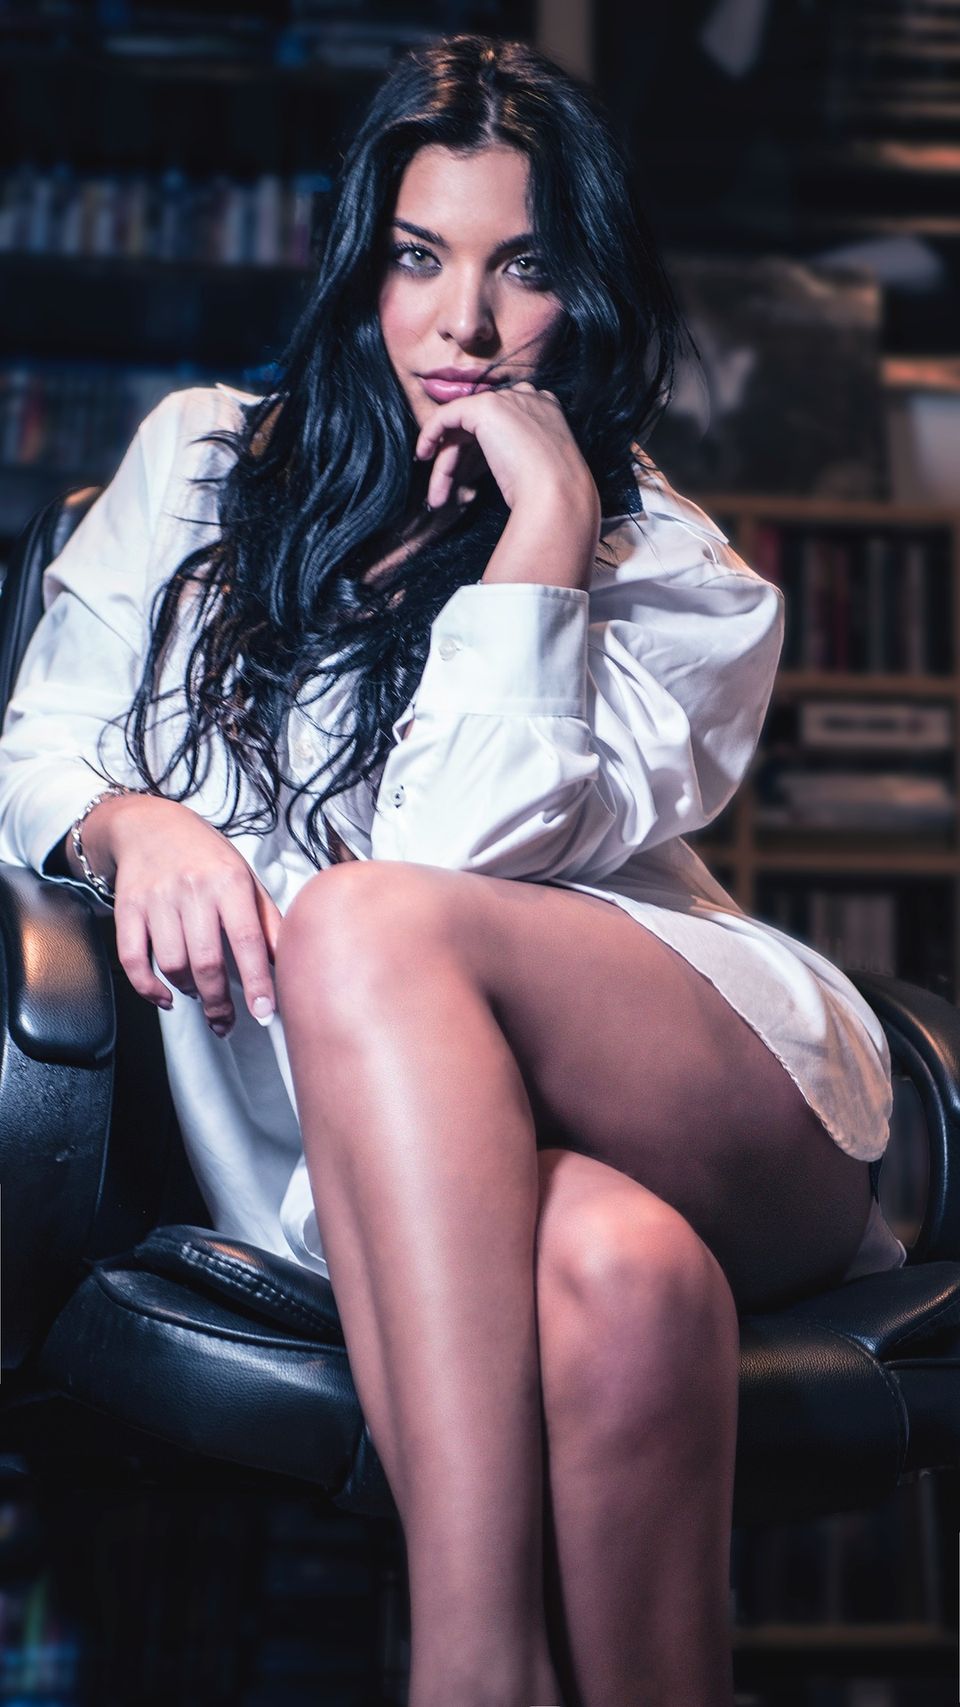 A mature woman sitting in a leather chair wearing nothing but an oversized white shirt.